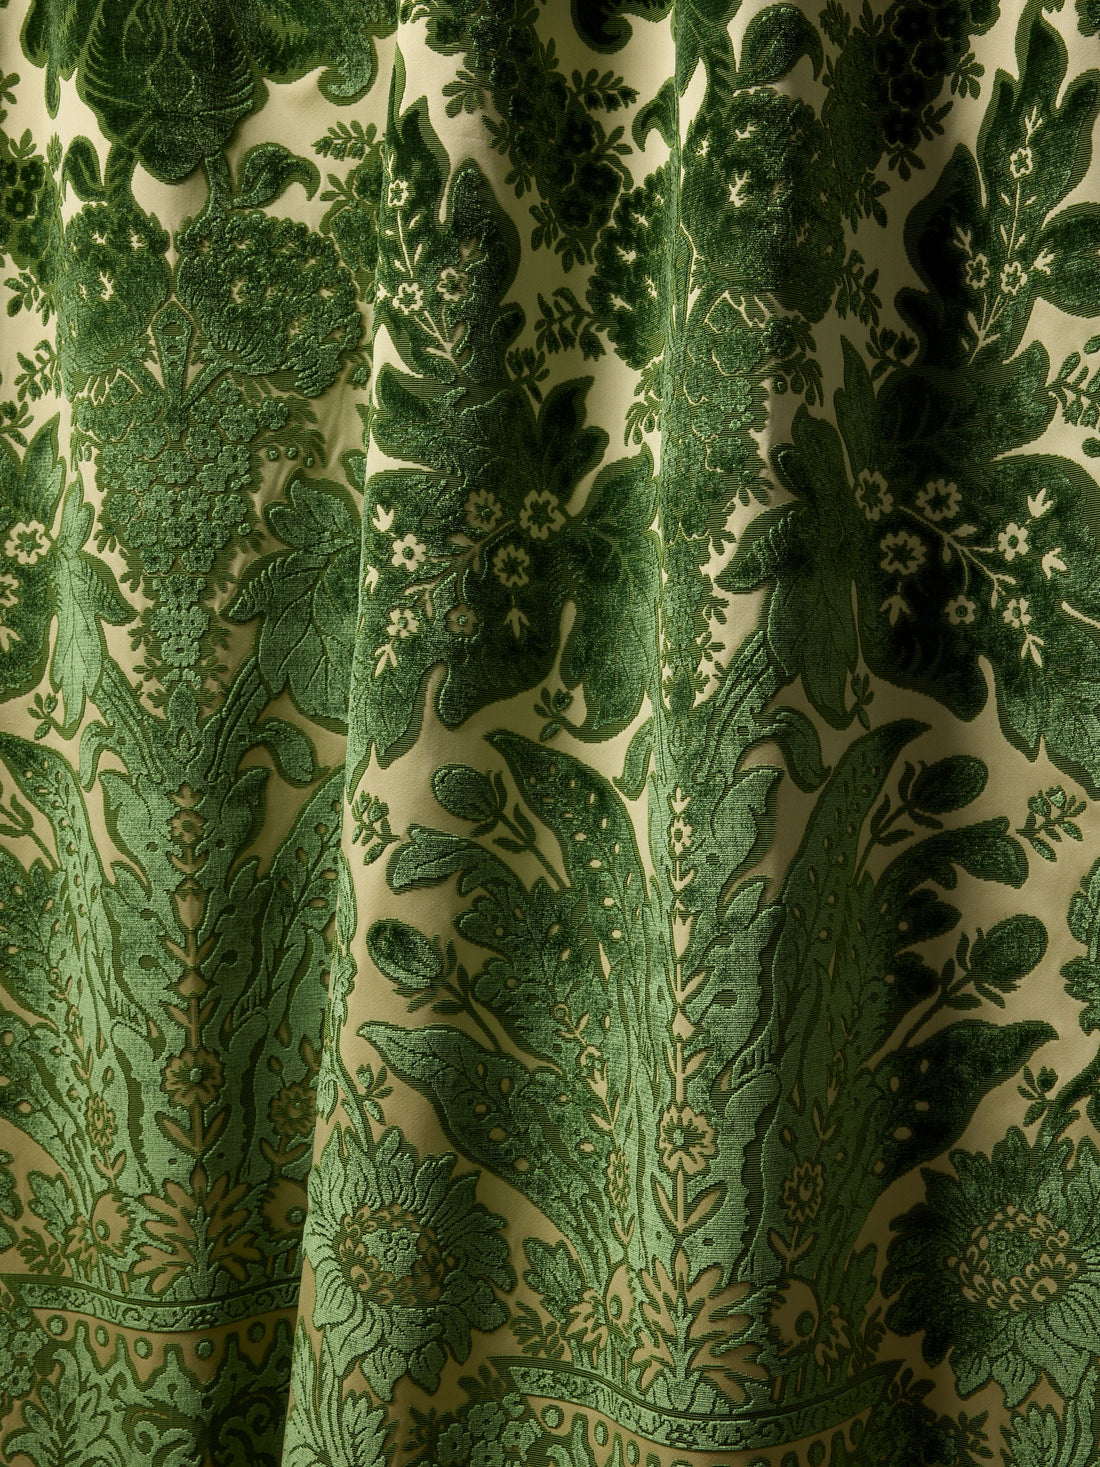 Regis Velvet Damask fabric in frond color - pattern number SC 000327321 - by Scalamandre in the Scalamandre Fabrics Book 1 collection